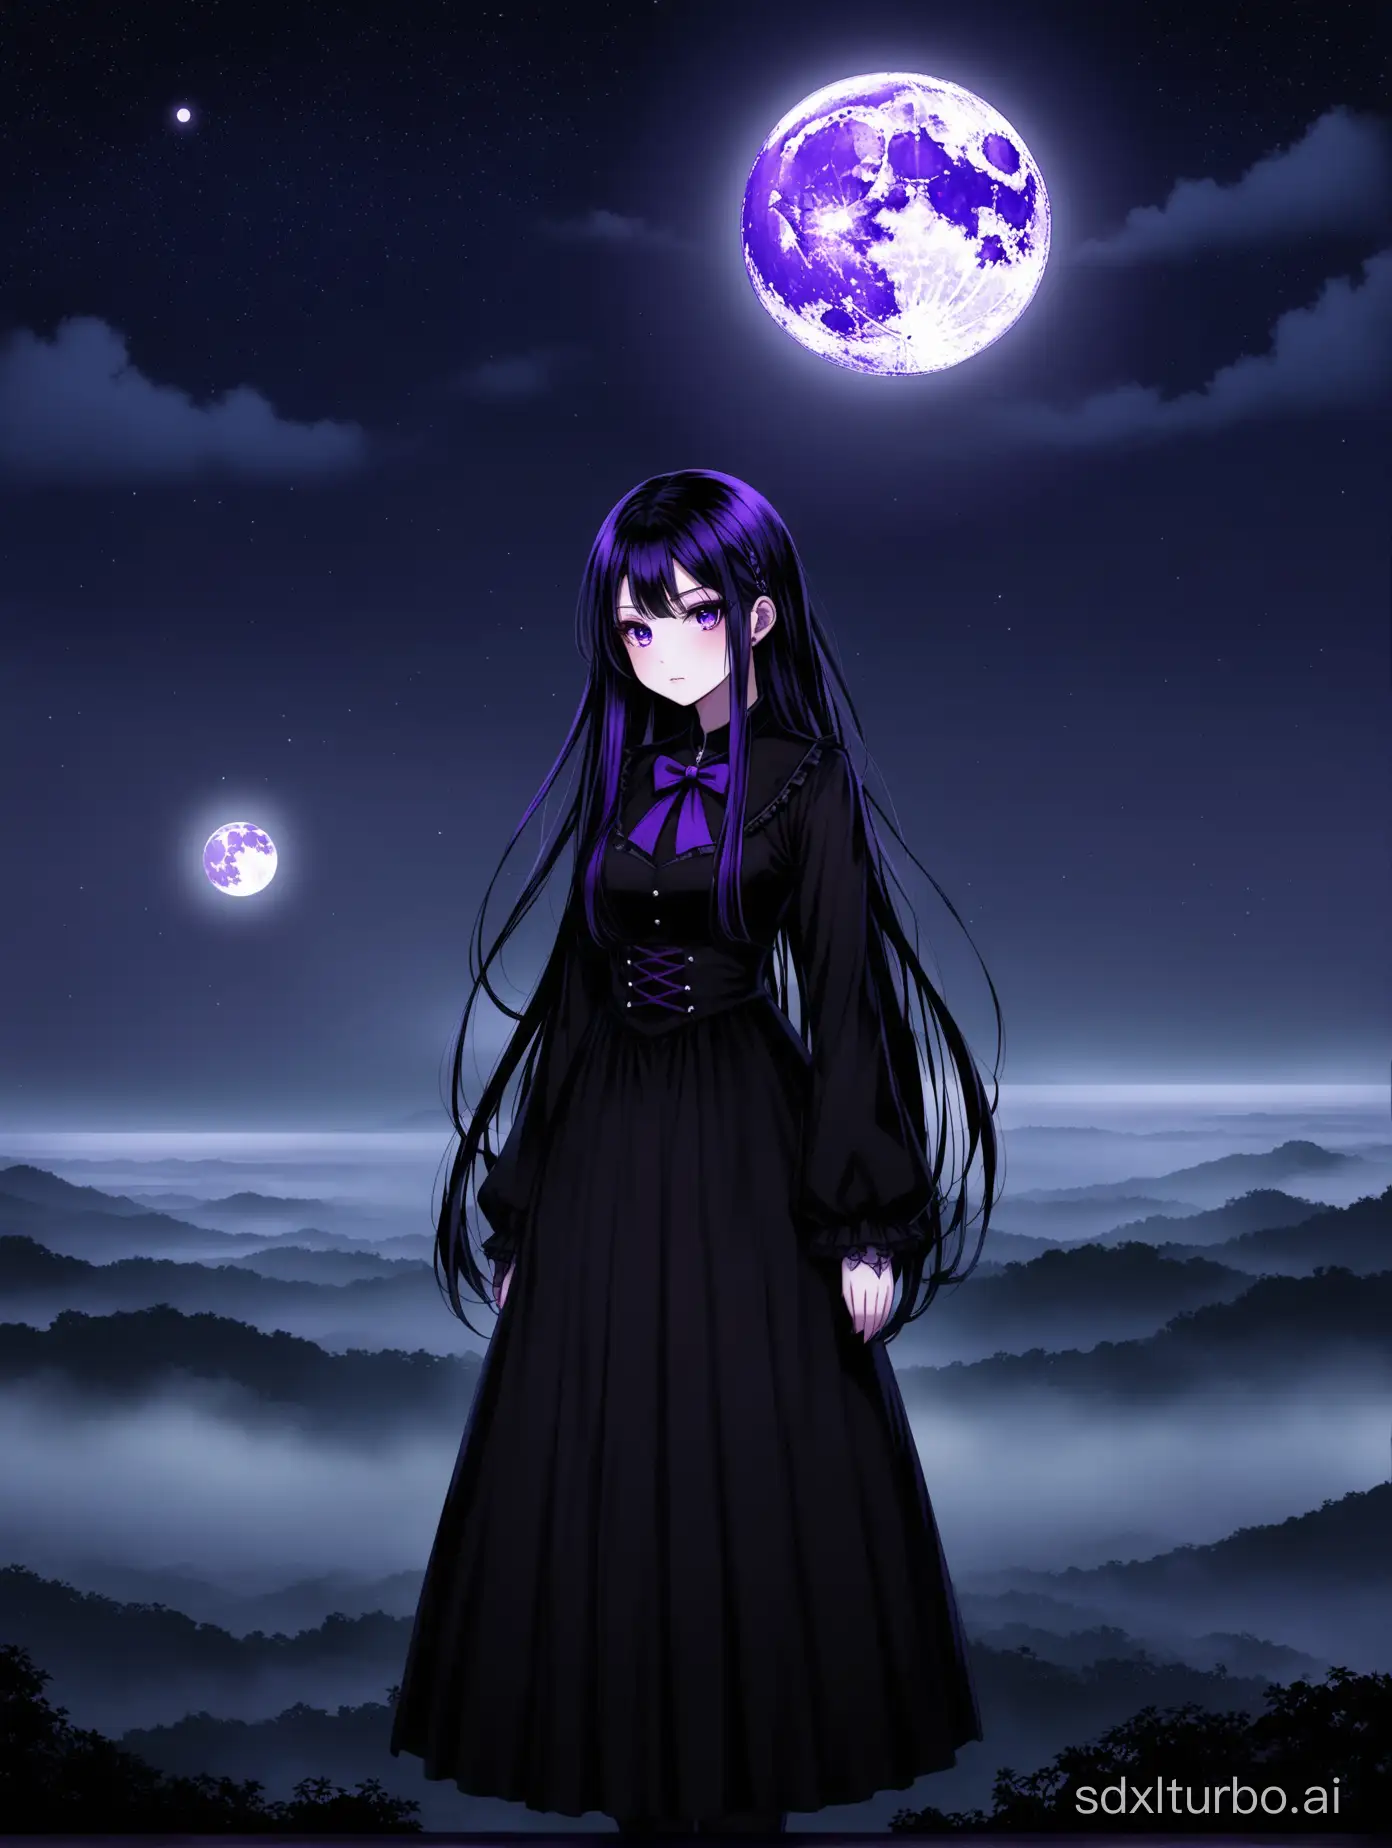 Rei Hino with purple highlights in her long hair, in dark colored Goth clothing, with a lonely narrow moon on the distant horizon with no stars and a foggy background.